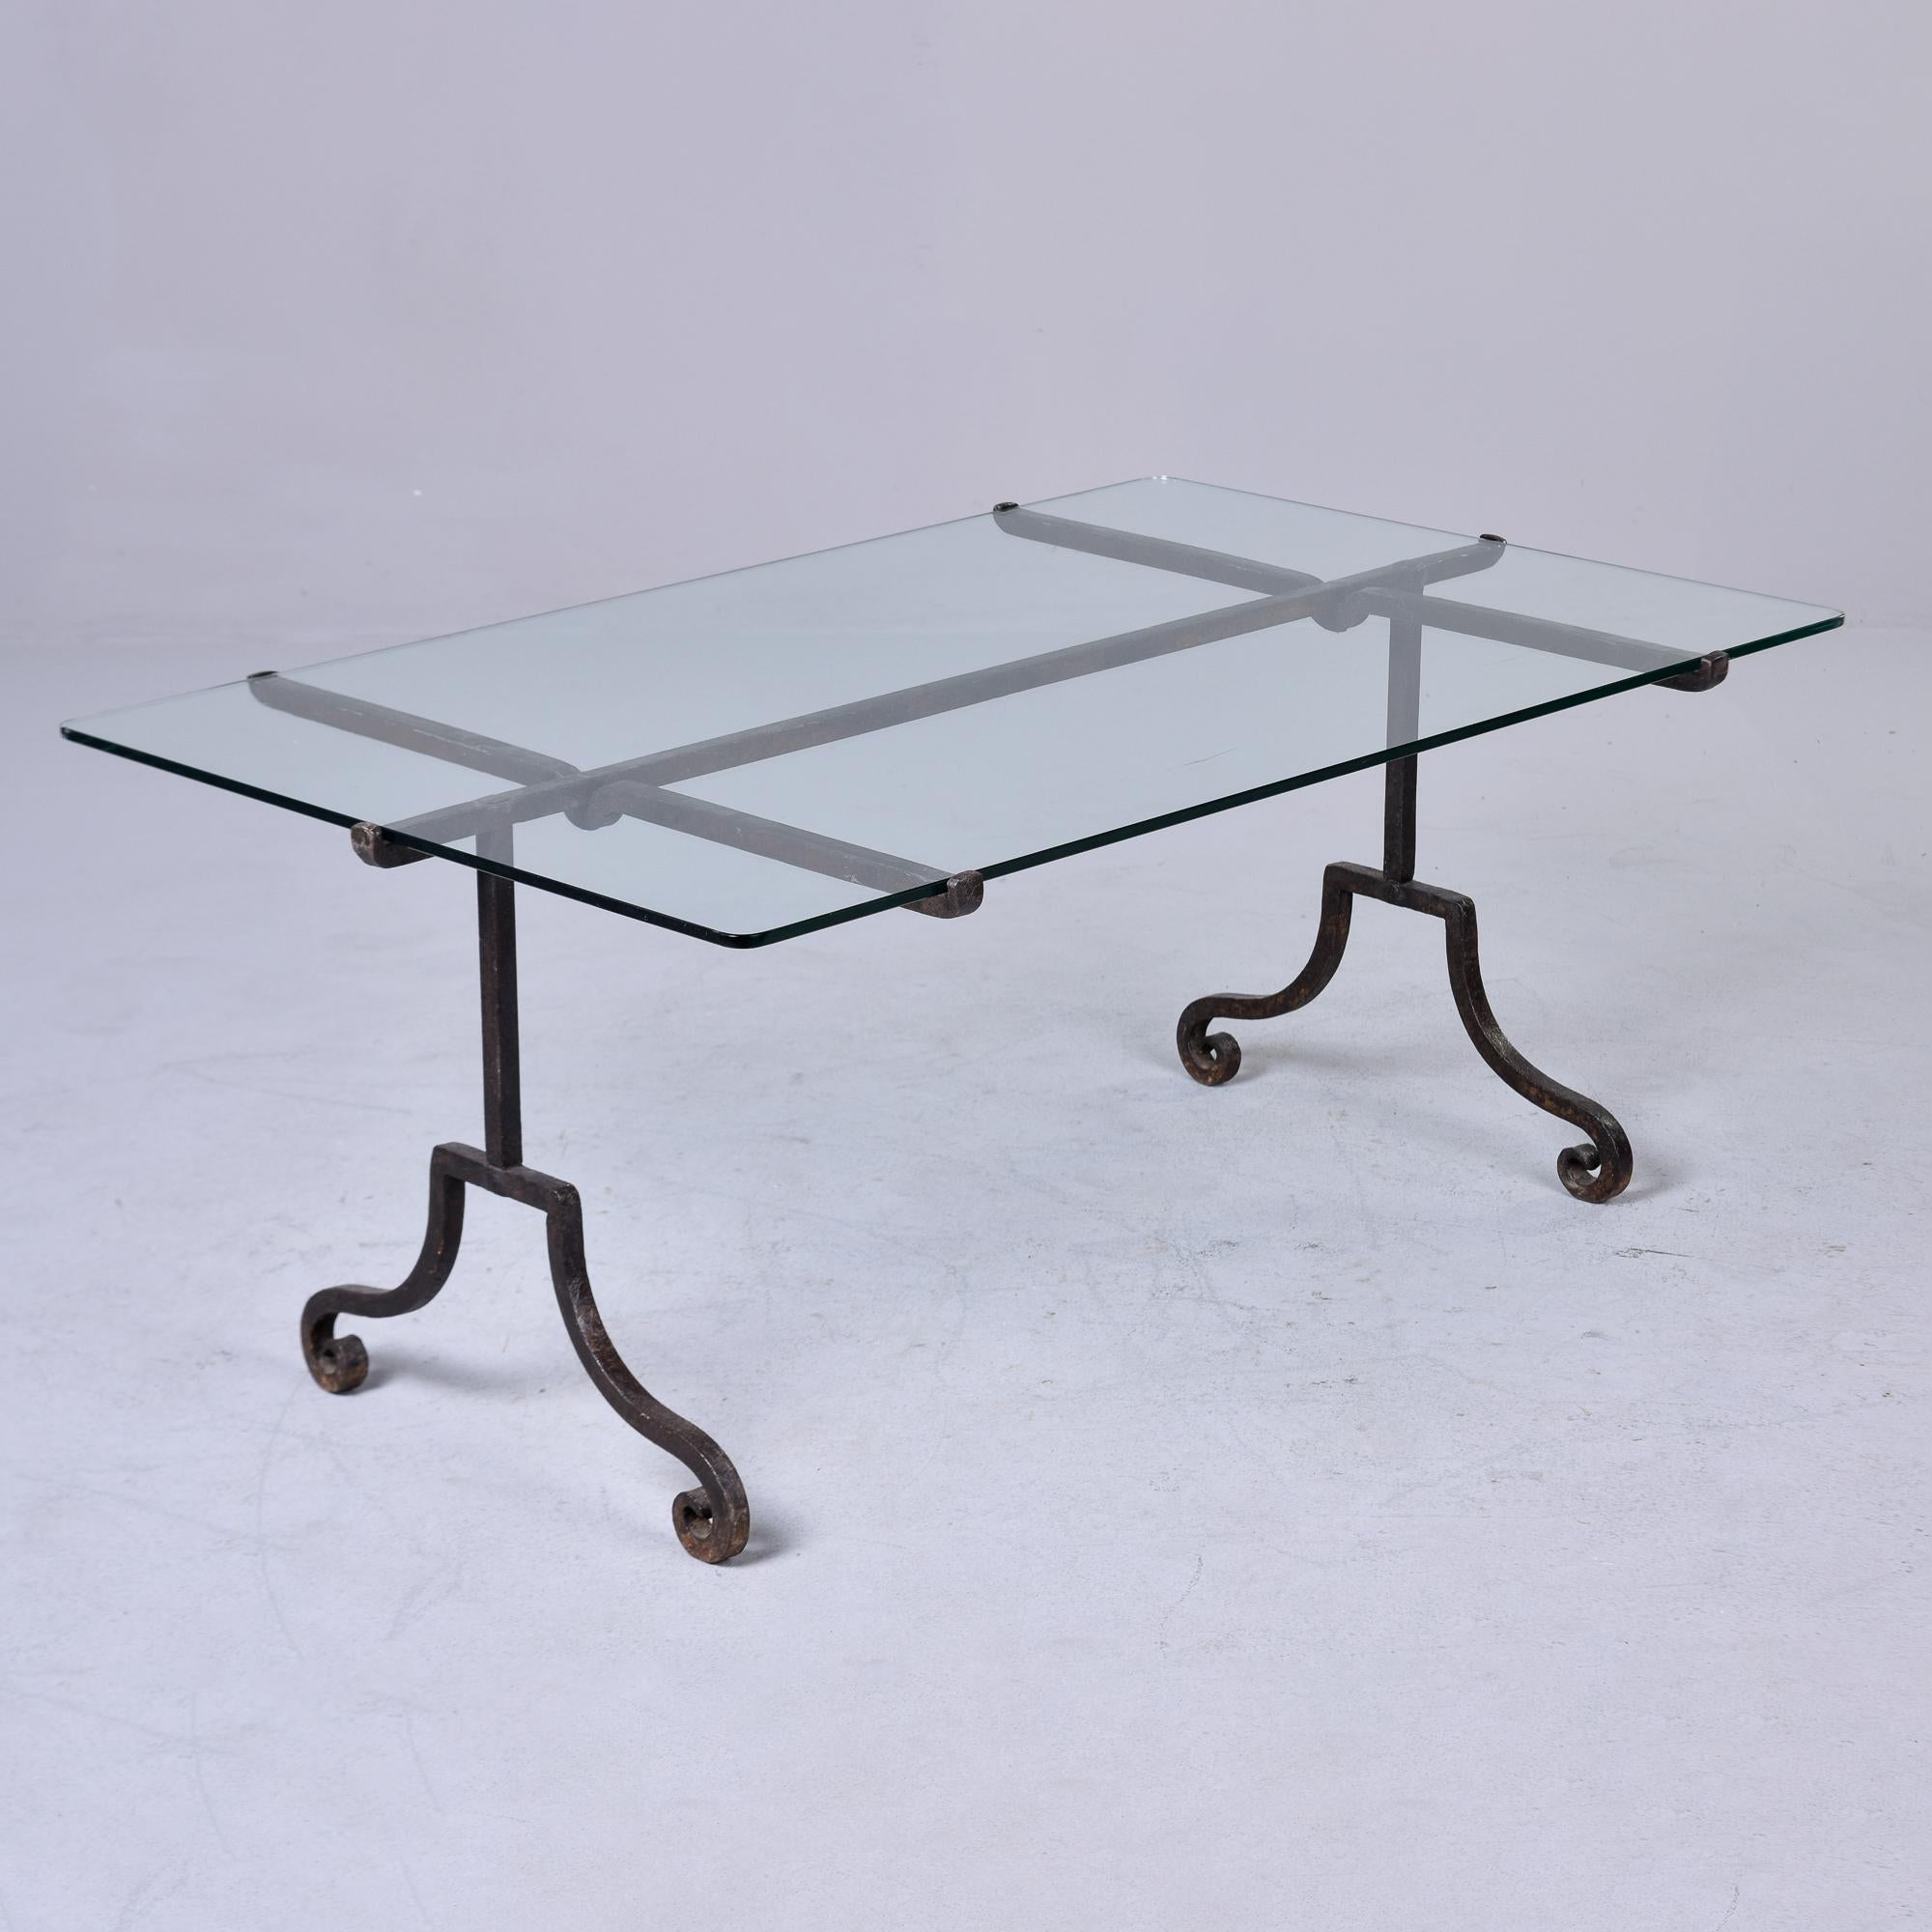 Found in Italy, this cocktail or coffee table dates from the 1970s and has an iron base and thick glass top. The dark wrought iron base has pleasing simple lines with scrolled feet and a 1/2” thick glass top that is securely held by fitted grooves